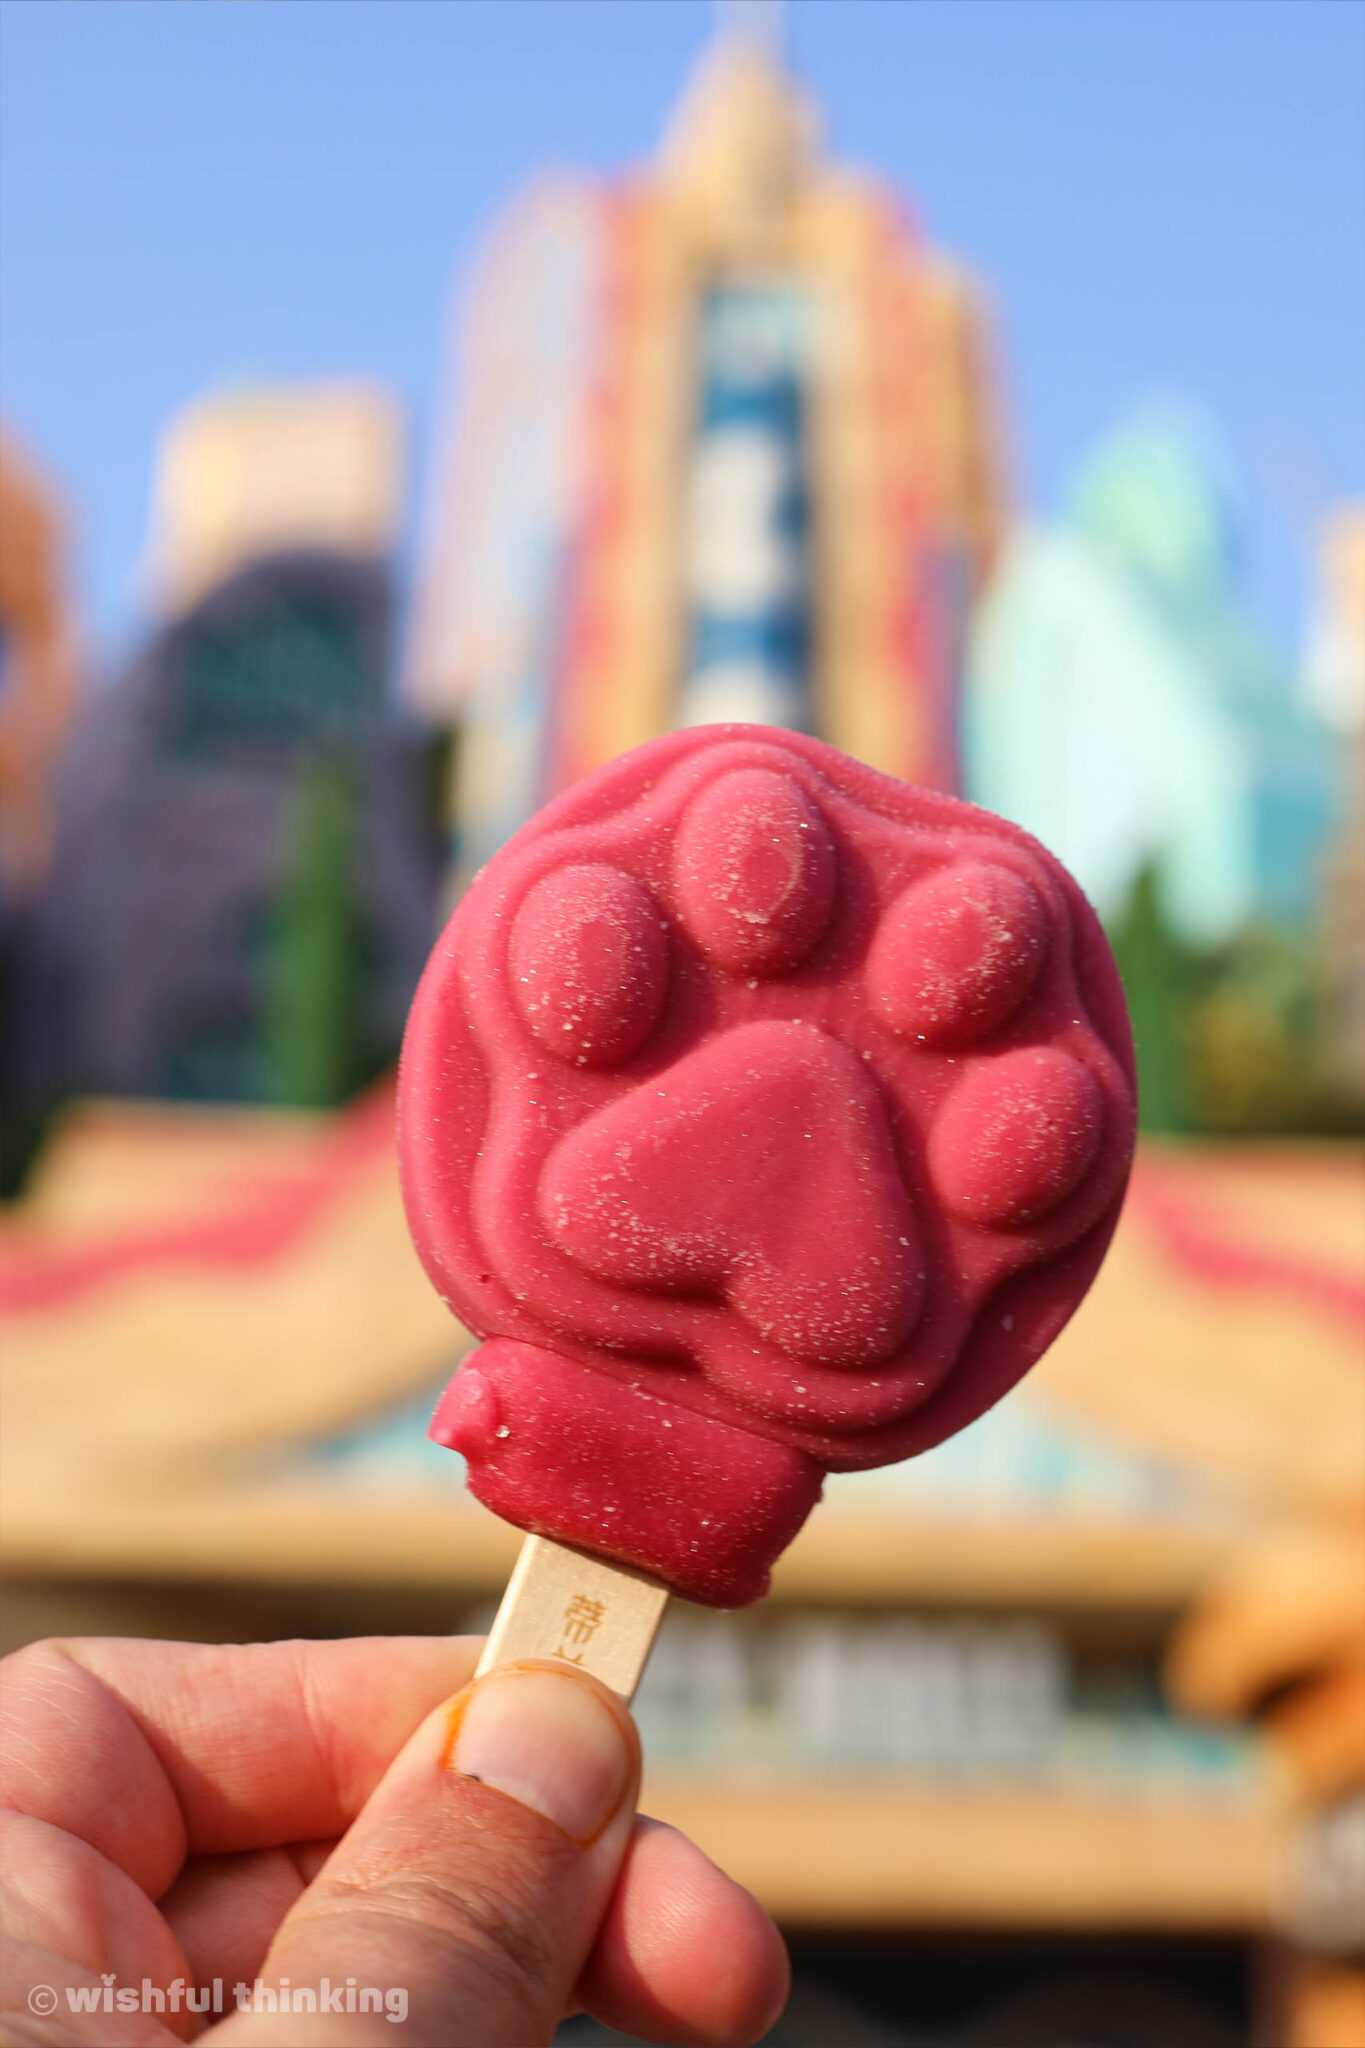 The tasty raspberry-flavored pawpsicle at Zootpia inside Shanghai Disneyland